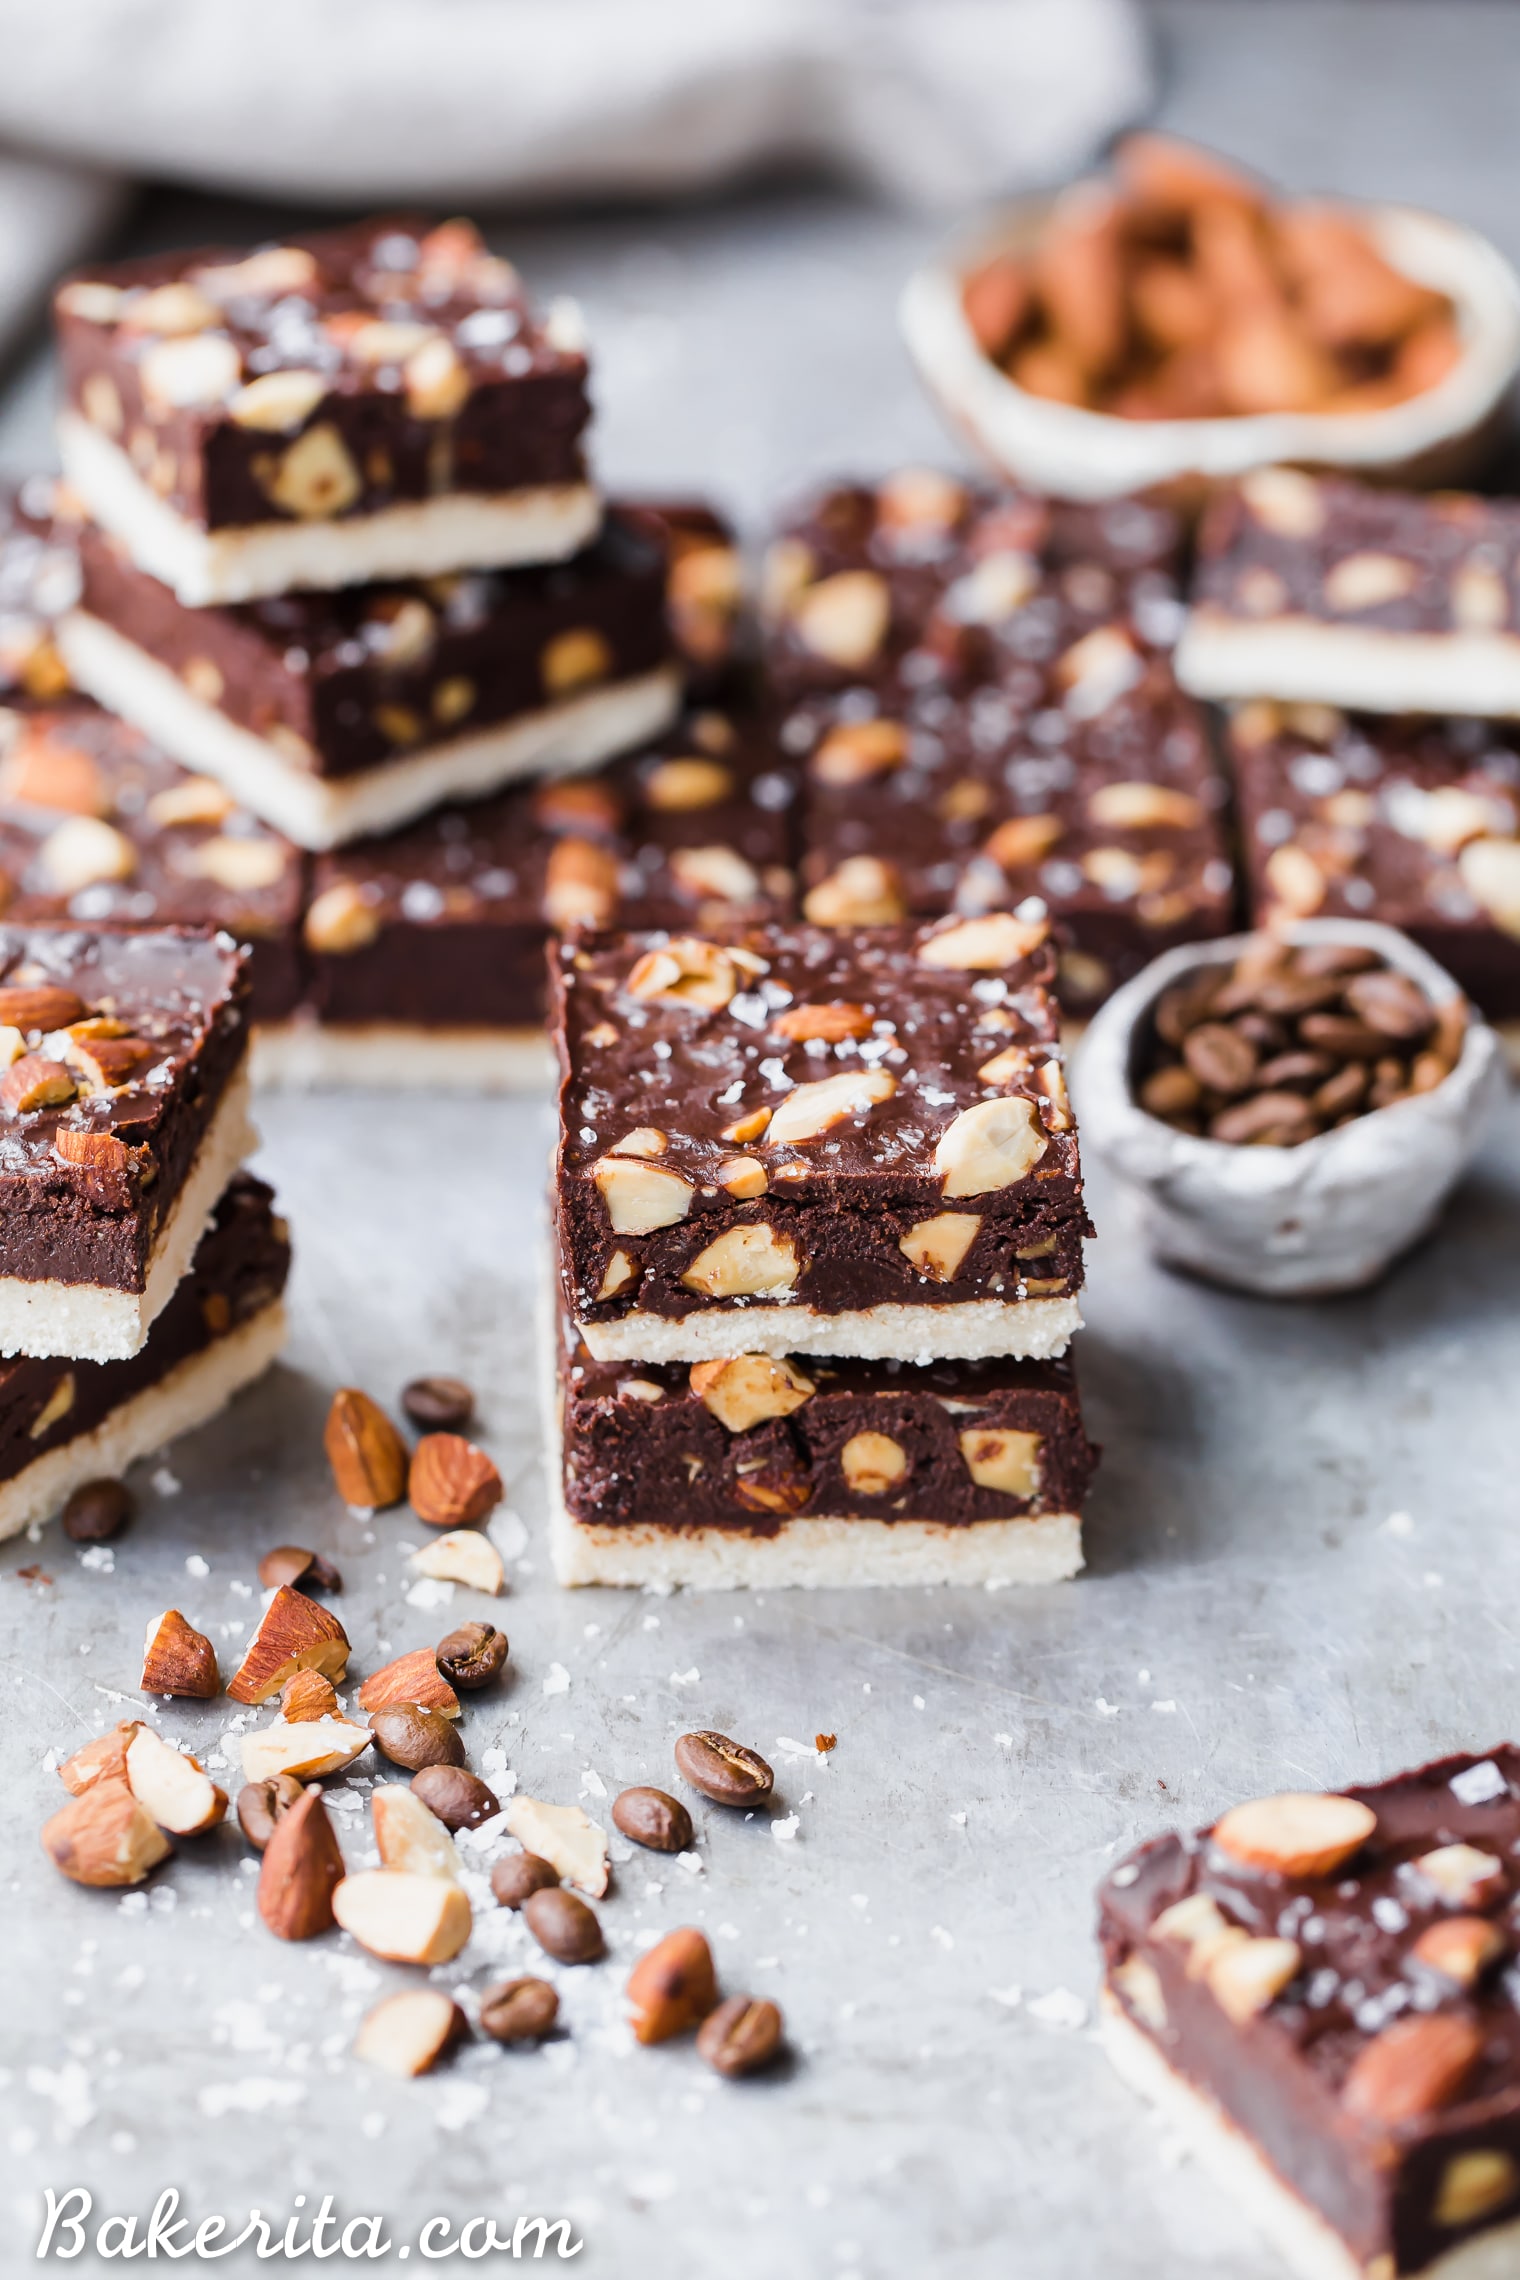 These Mocha Almond Fudge Bars are incredibly rich and delicious, with a chocolate-coffee fudge studded with crunchy almonds, all sitting on top of a simple shortbread crust. These gluten-free, paleo and vegan fudge bars are irresistible!